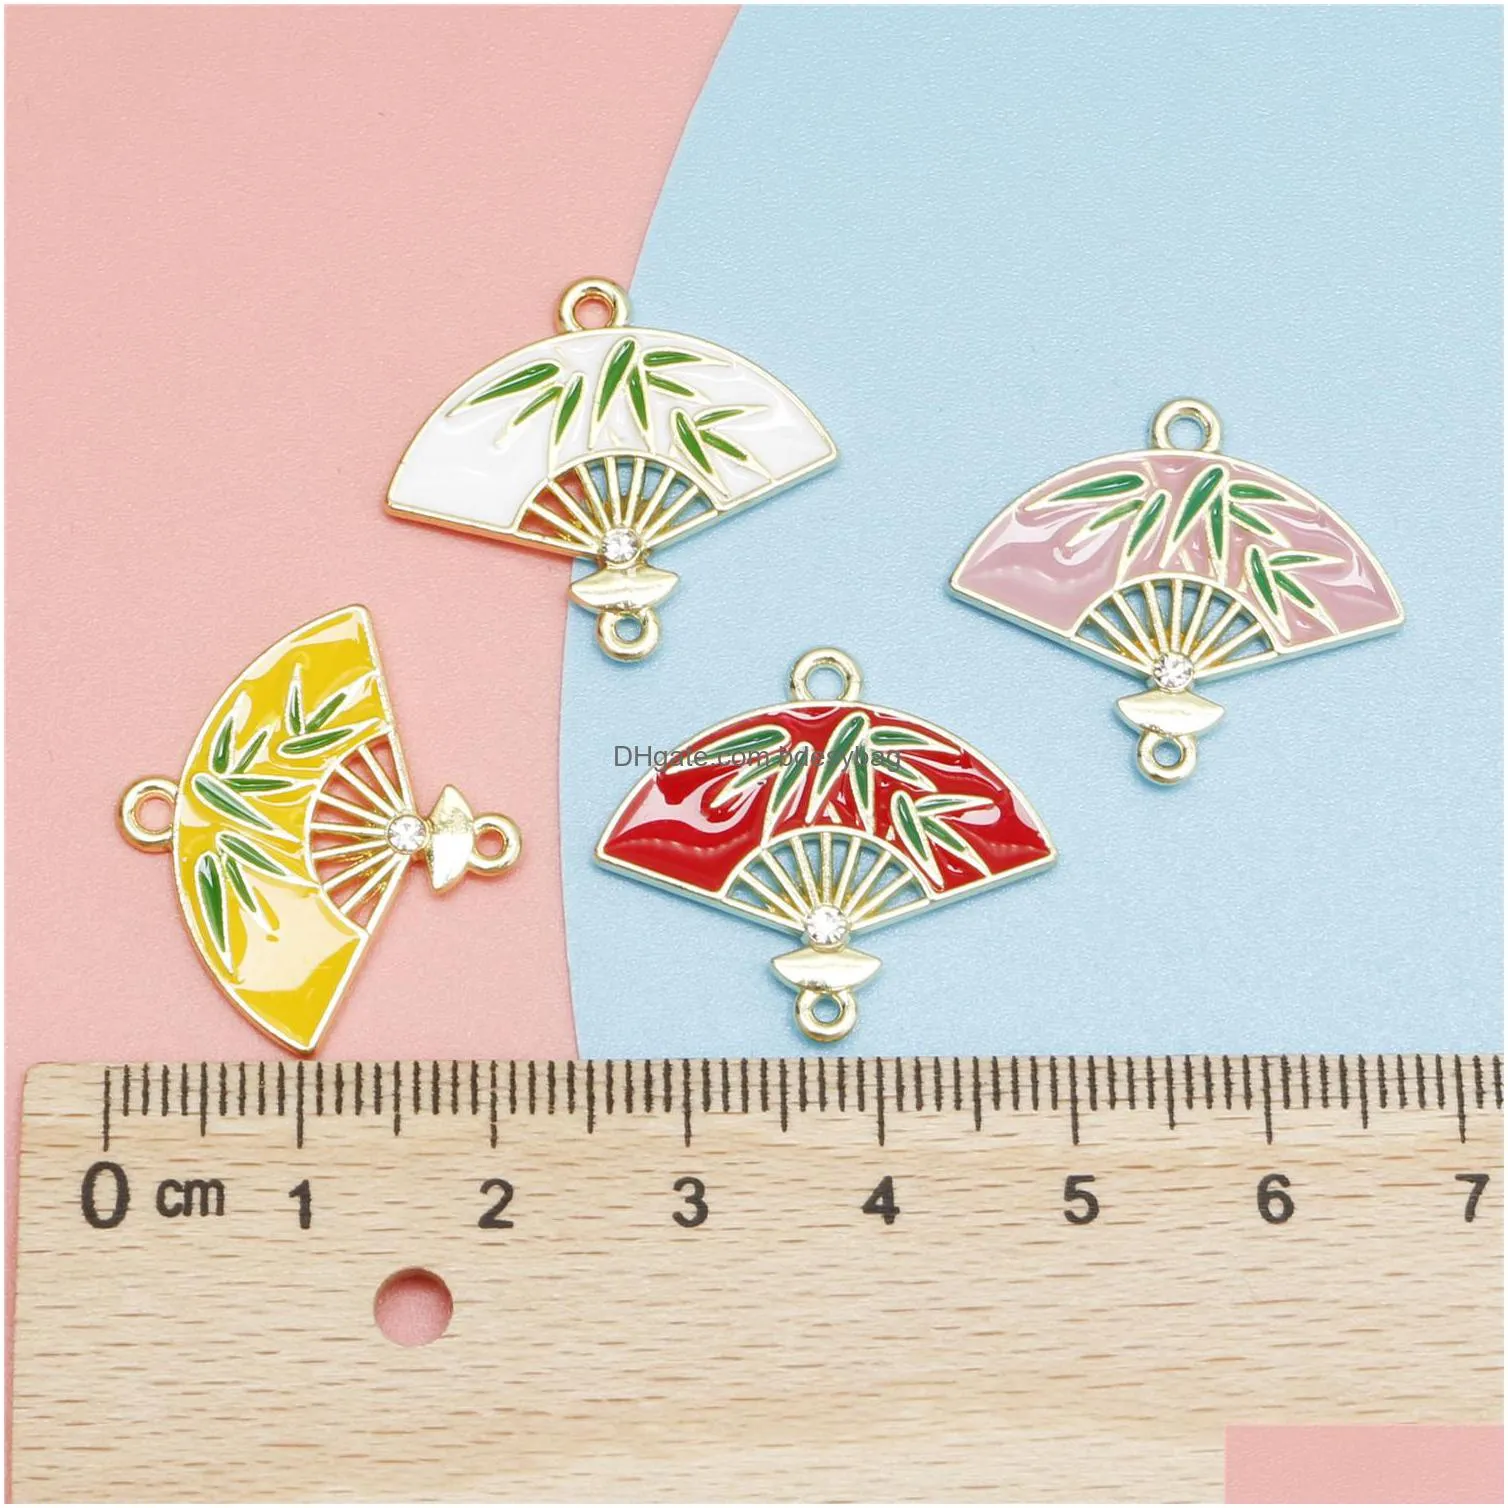 20pcs/lot chinese style enamel fan charms connectors diy earring bracelet necklace pendant for jewelry making accessories